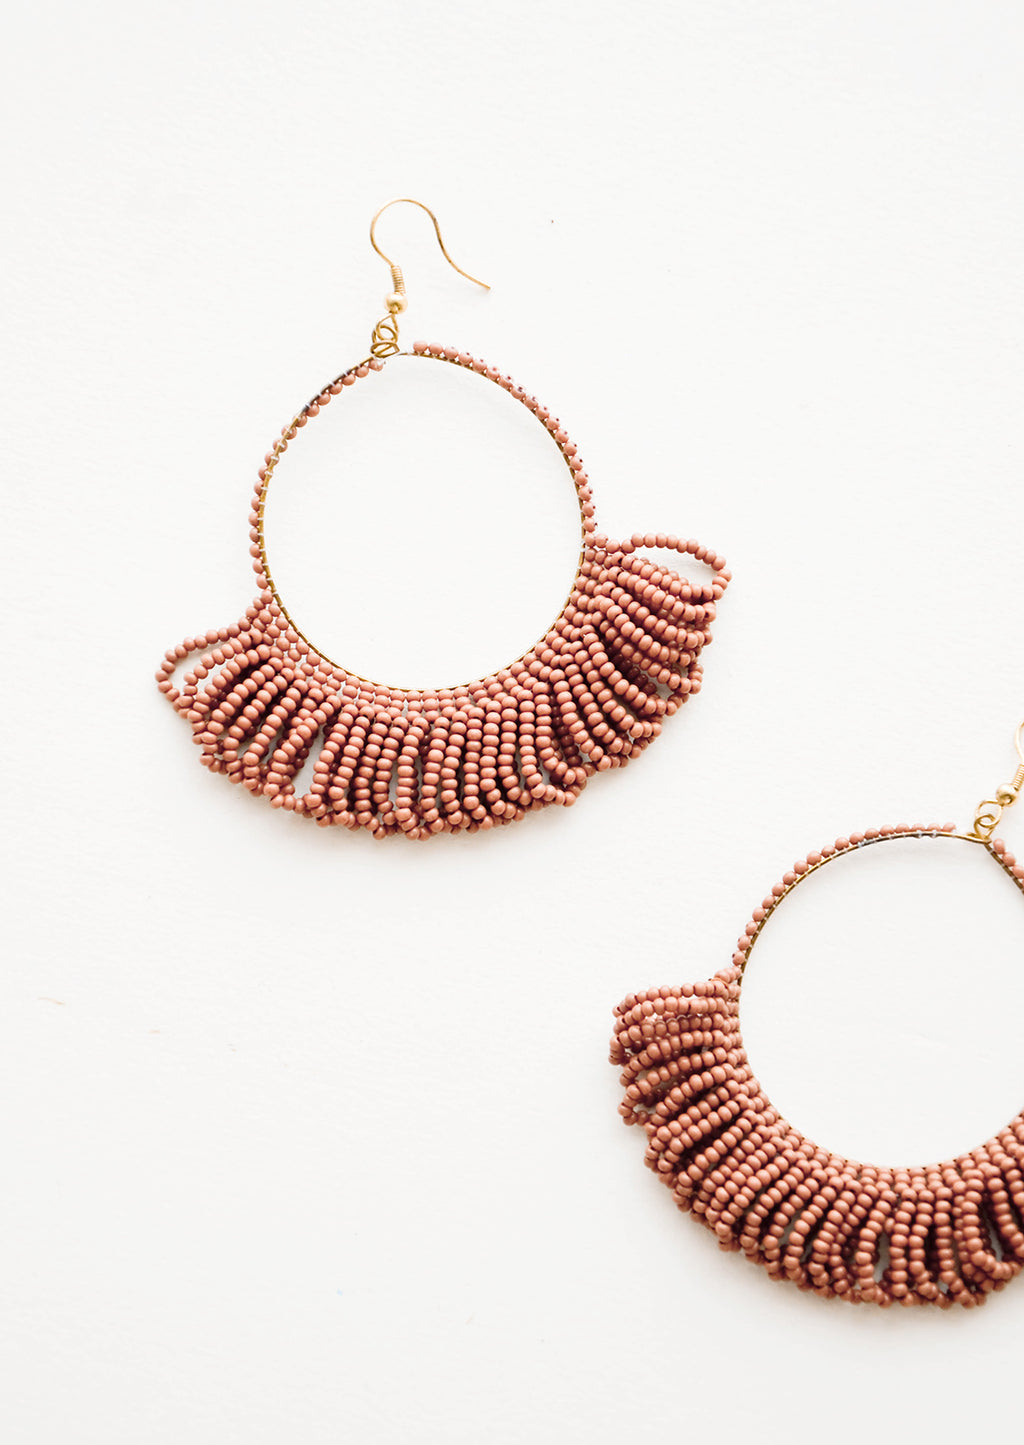 Clay: Dangling hoop earrings featuring clay red beads and accented with hanging beaded, looped fringe.